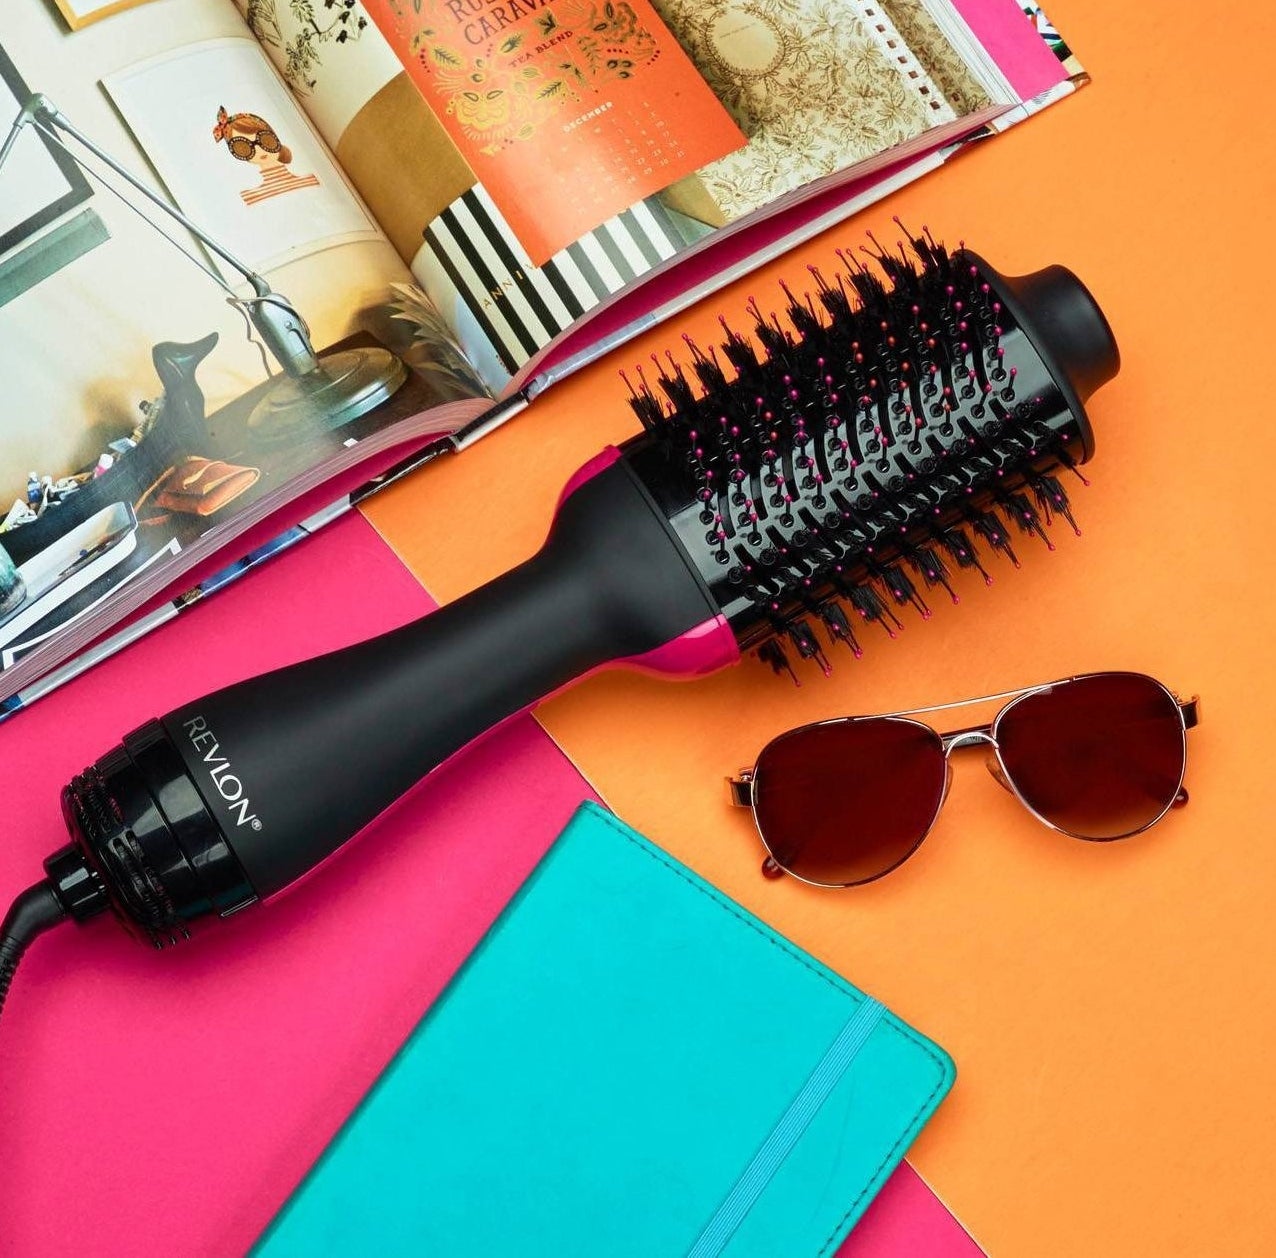 The Revlon hair dryer in black and pink beside a journal, sunglasses, and a magazine